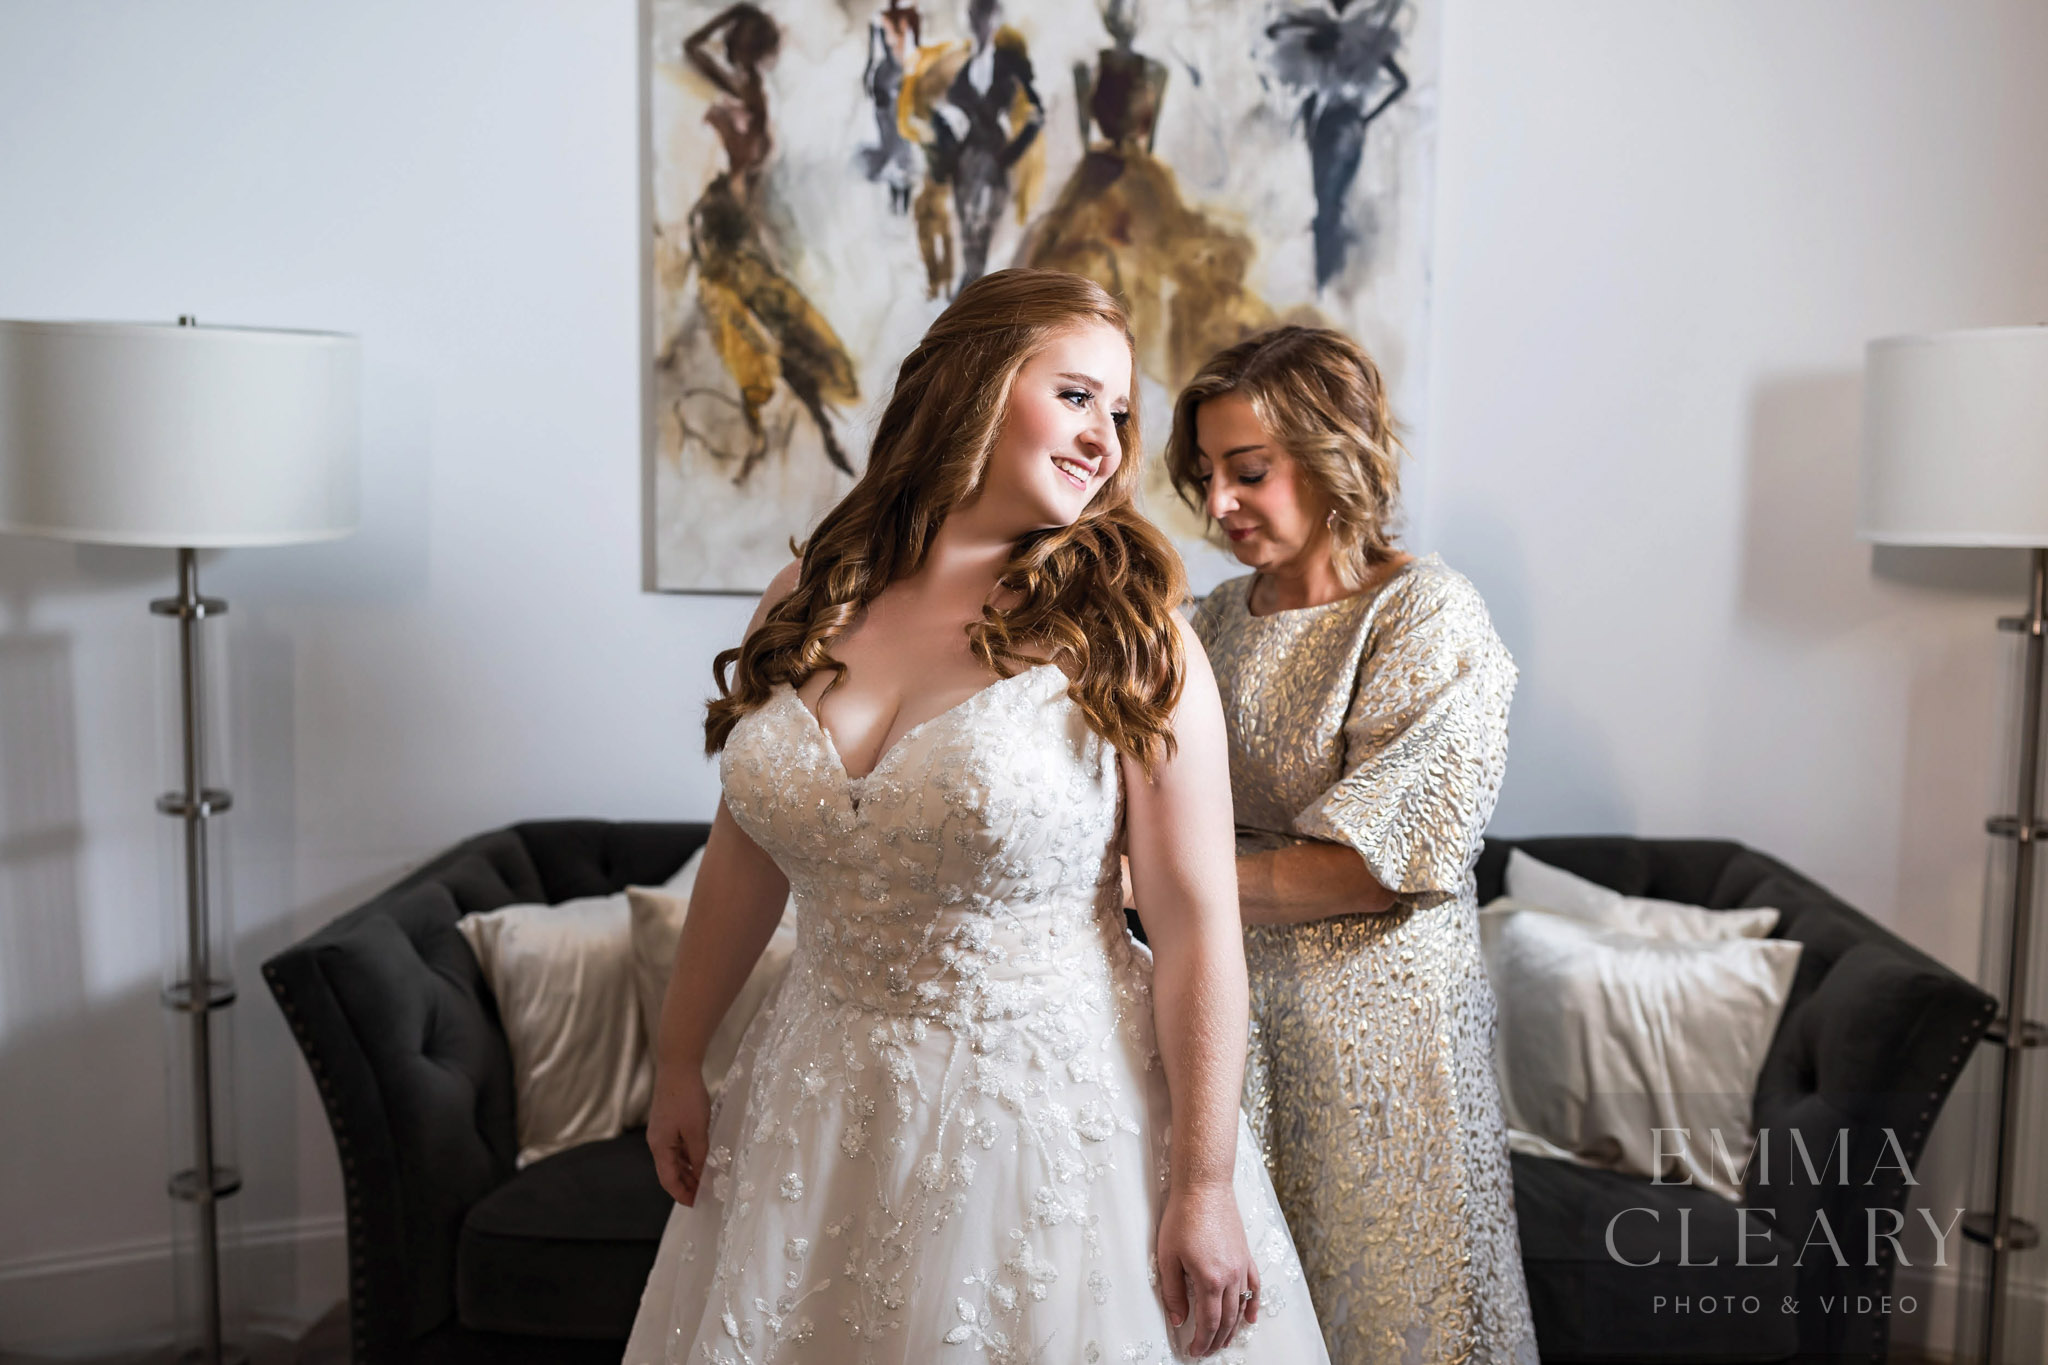 Mom helps the bride with the dress